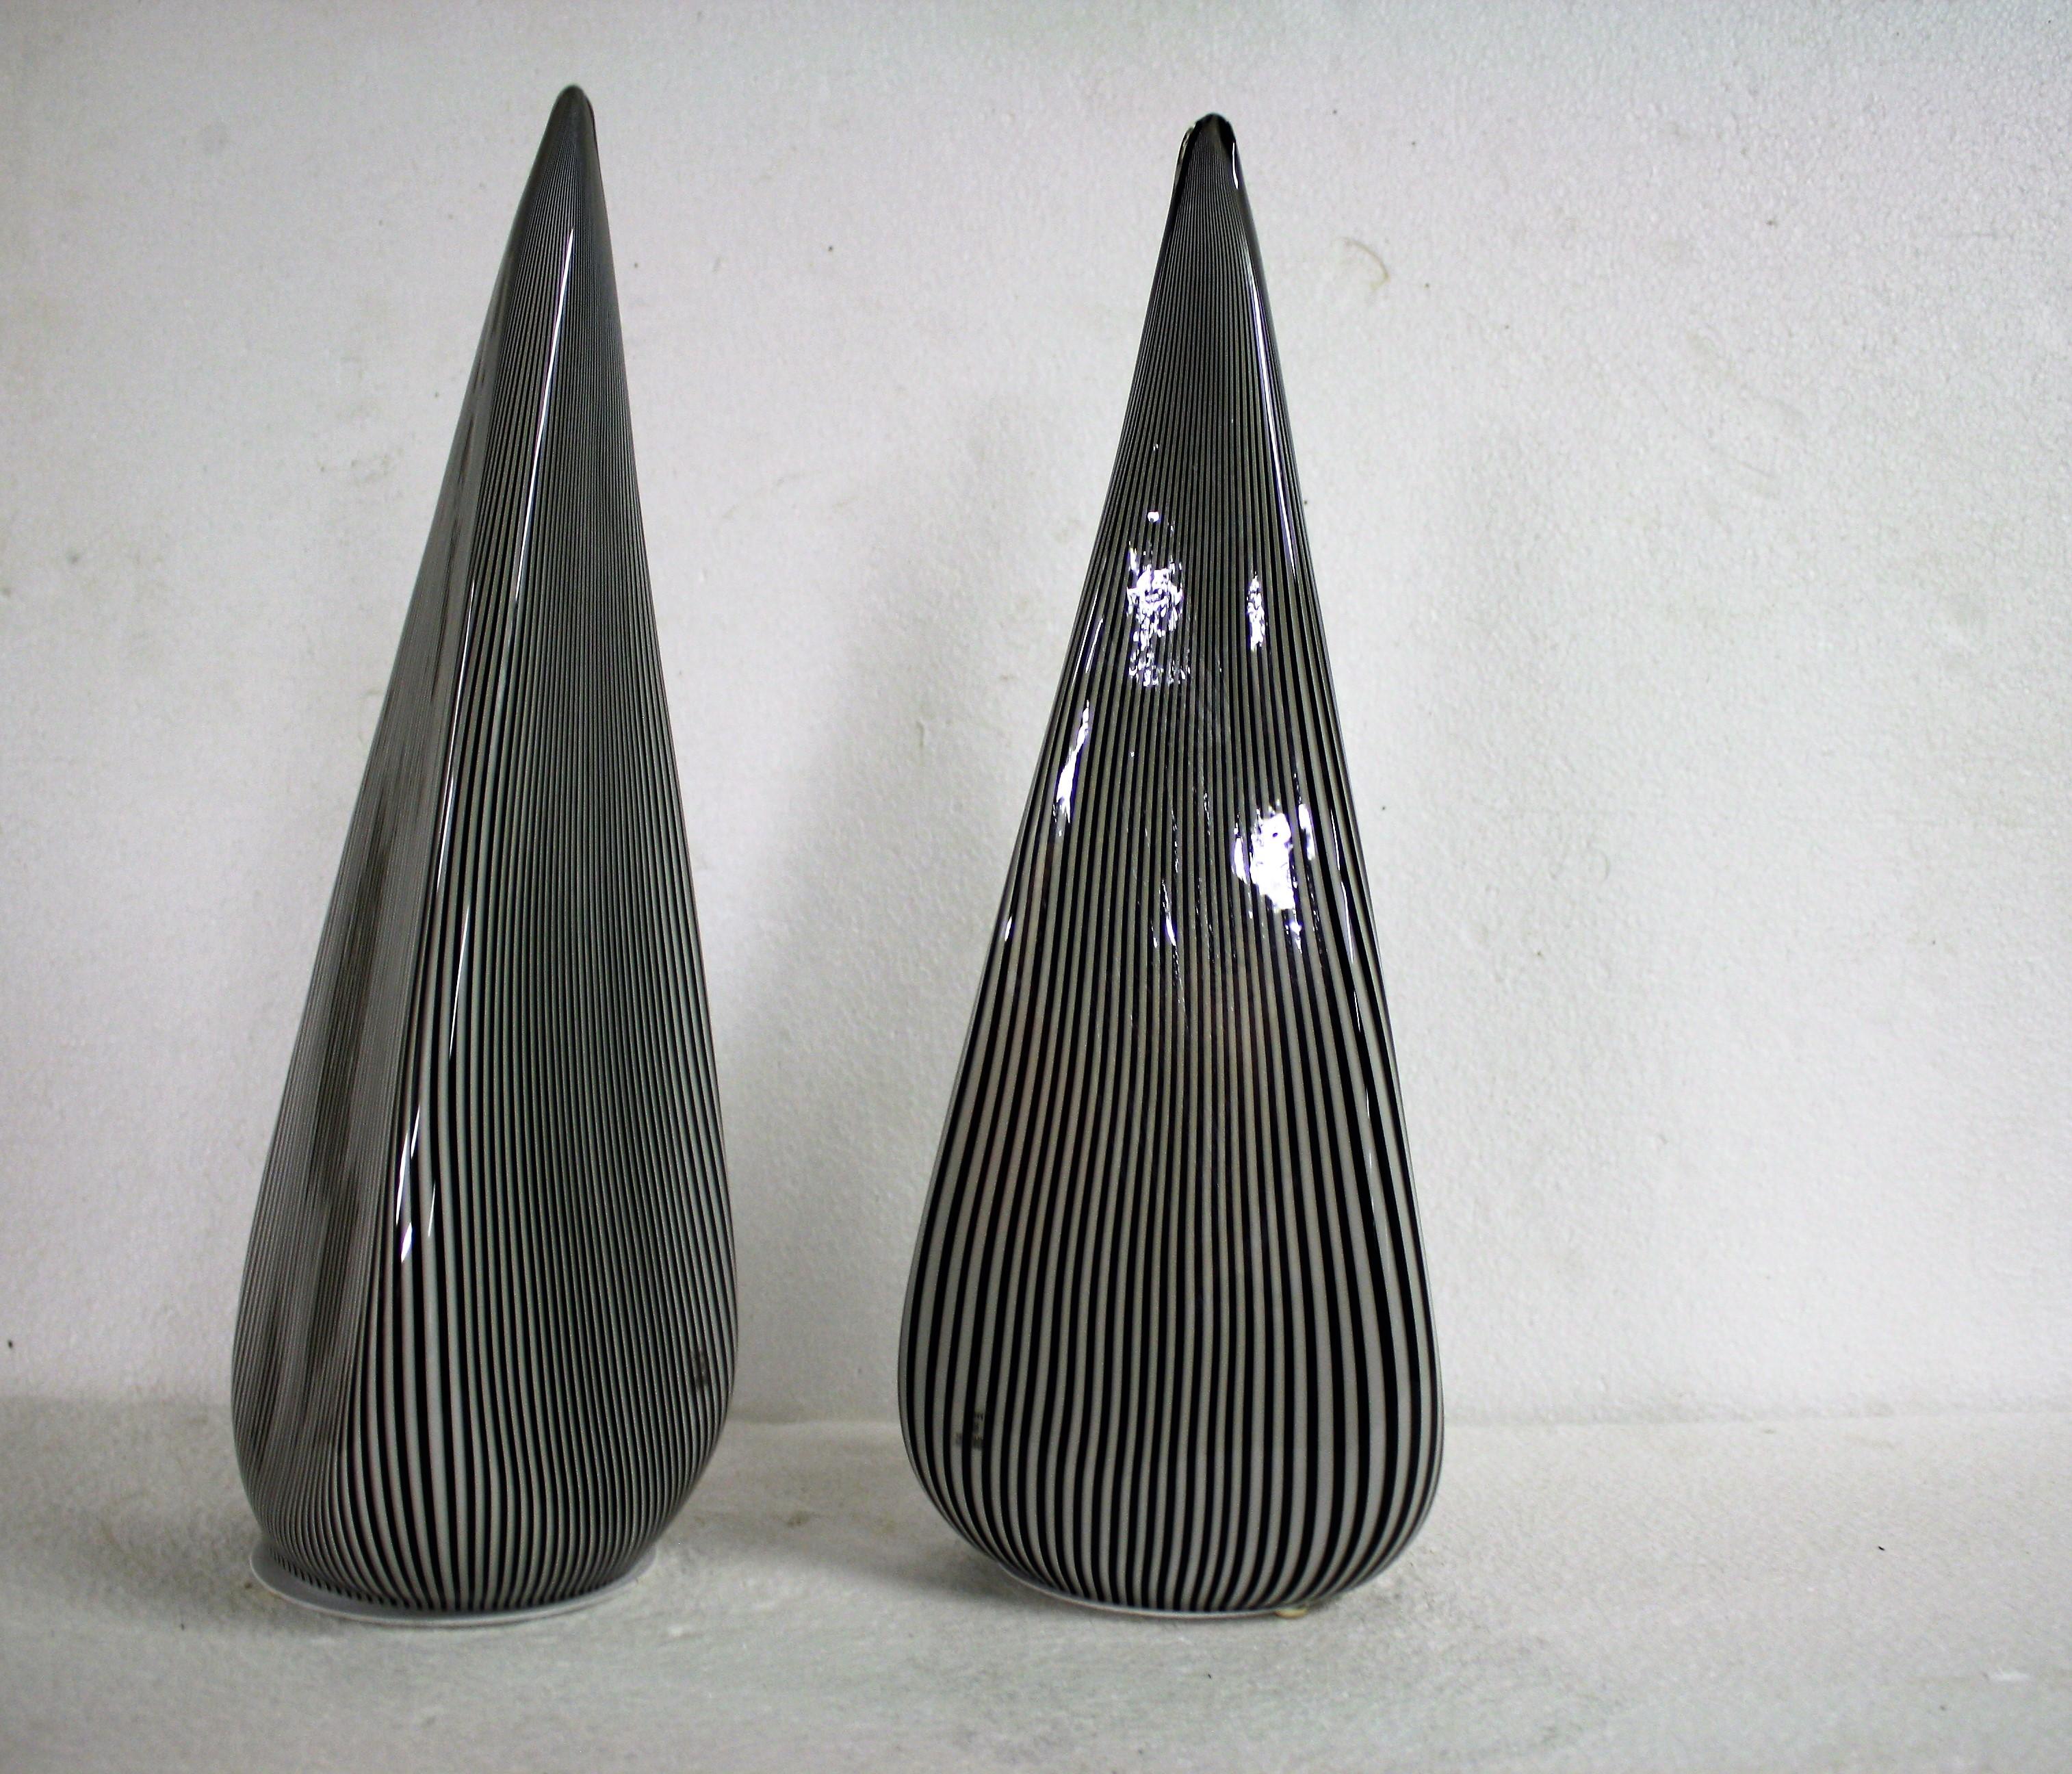 Pair of rare pyramid shaped Murano glass lamps manufactured by Vetri.

The lamps have a zebra like pattern which would work well in many interiors.

Both lamps are labelled.

Good condition, no scratches or chips.

Italy, 1970s.

Tested